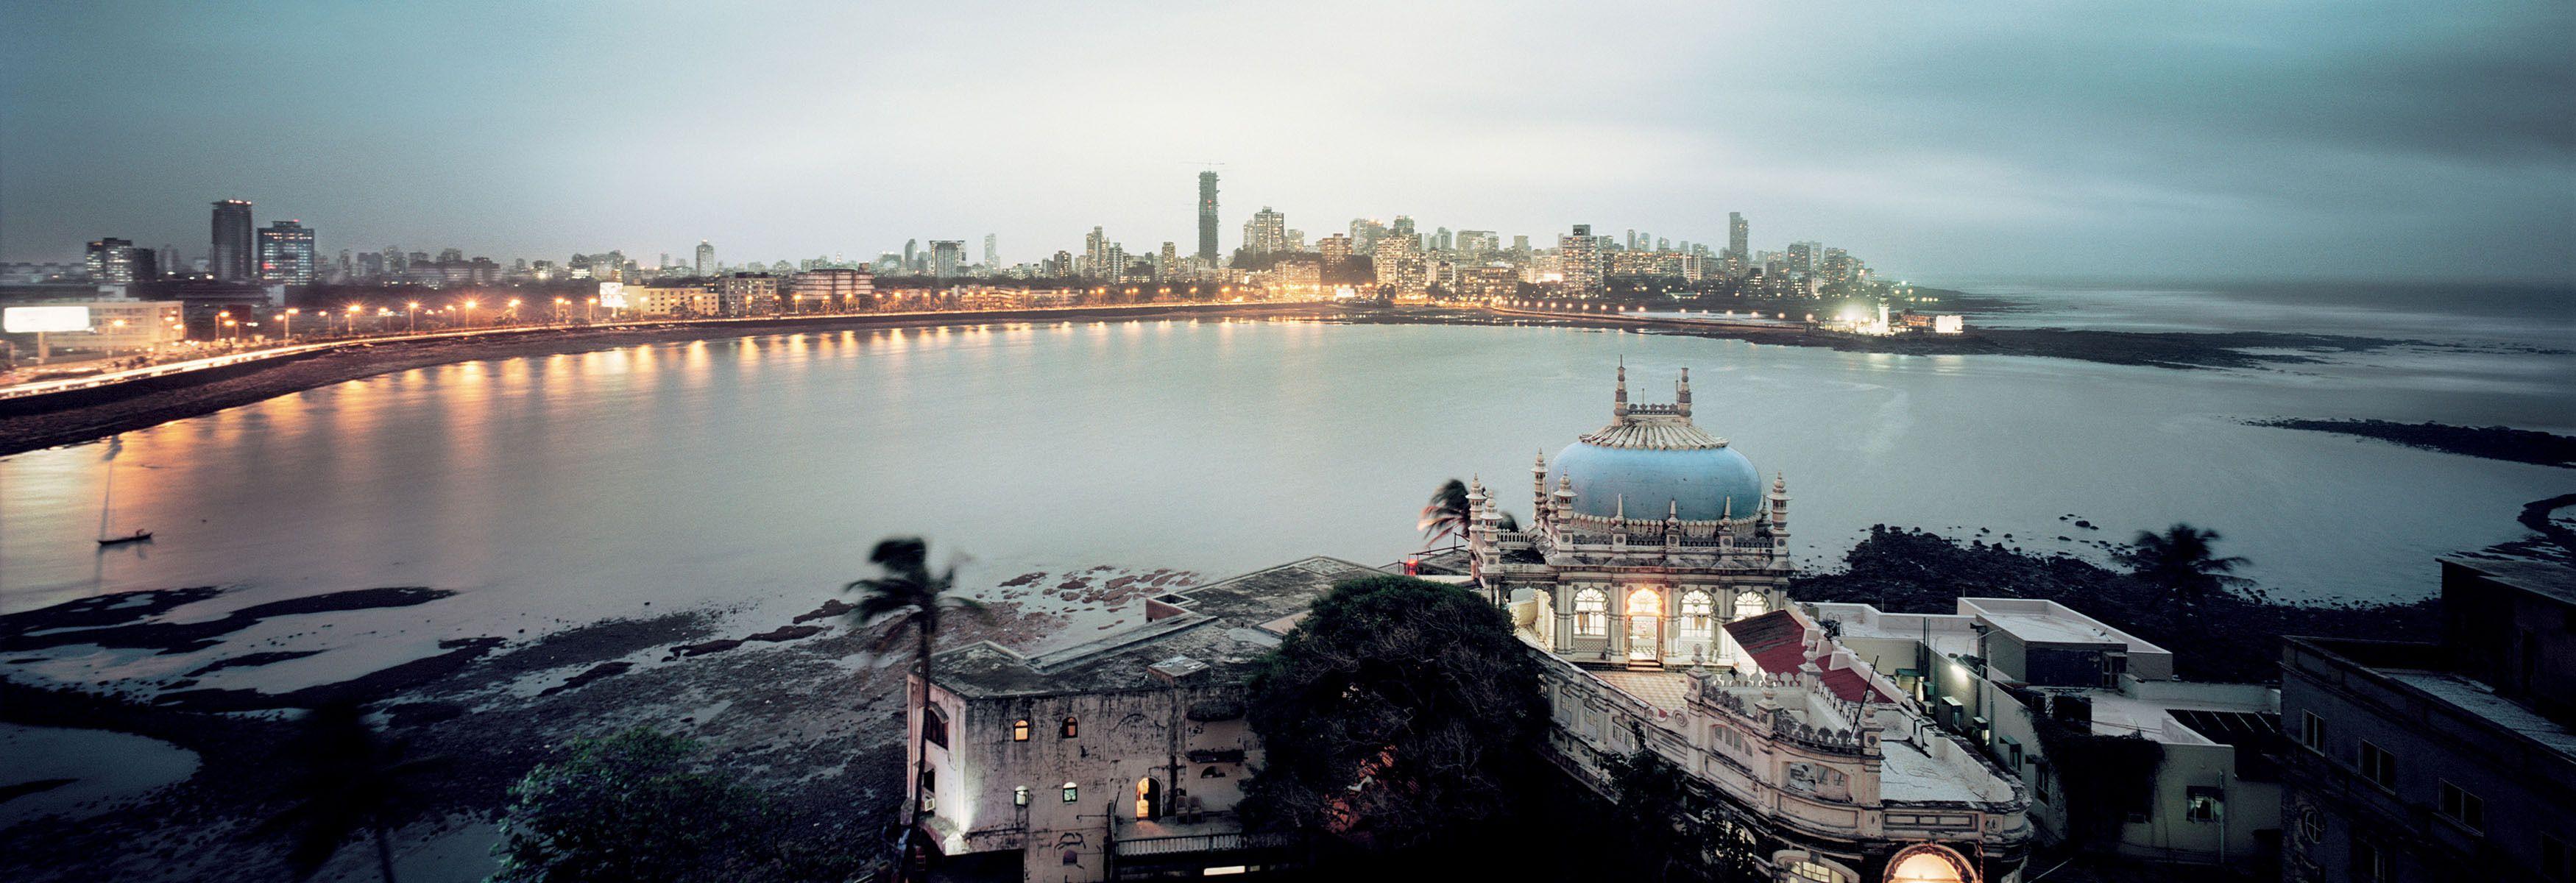 View on Mumbai wallpaper and image, picture, photo